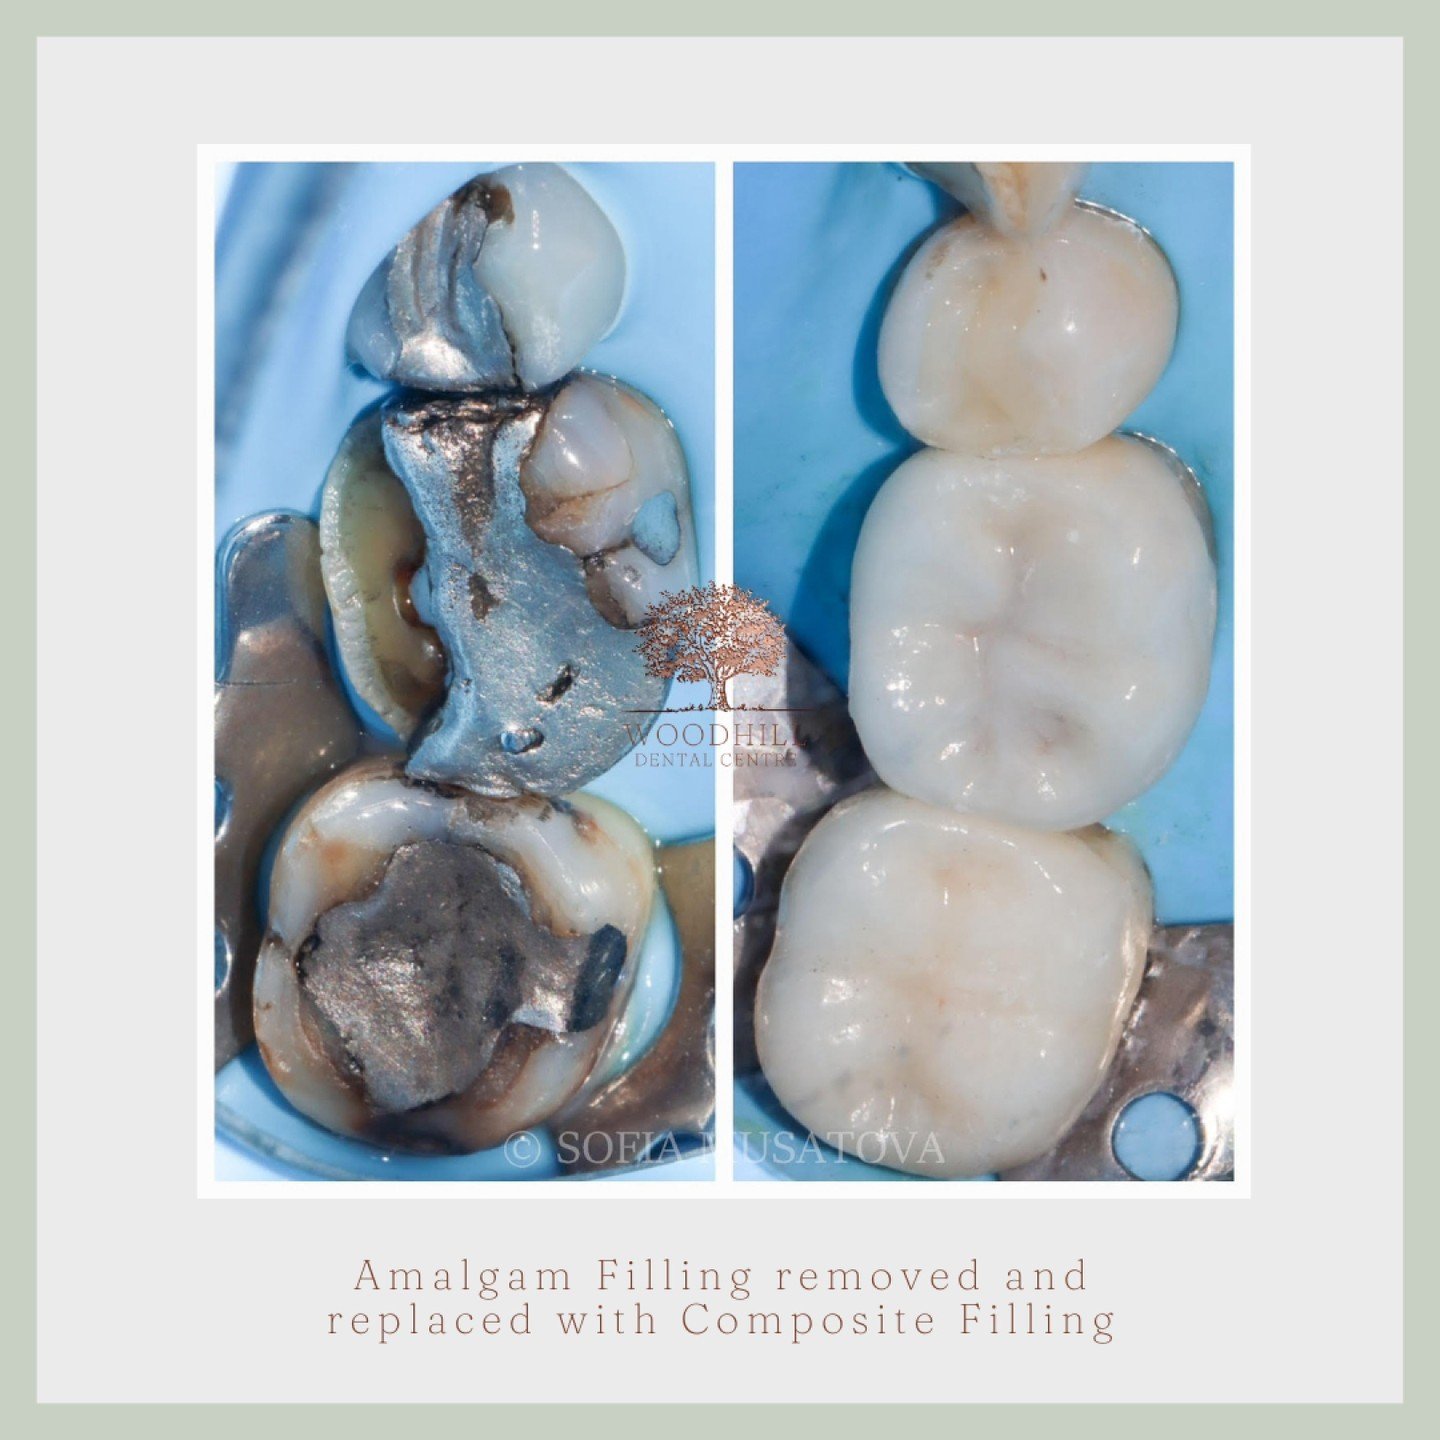 In this patients dental case, we demonstrate the removal of old fillings and decay, followed by the restoration of teeth using emax full porcelain crowns. The patient's worn and decayed teeth were carefully treated and prepared before the emax restor